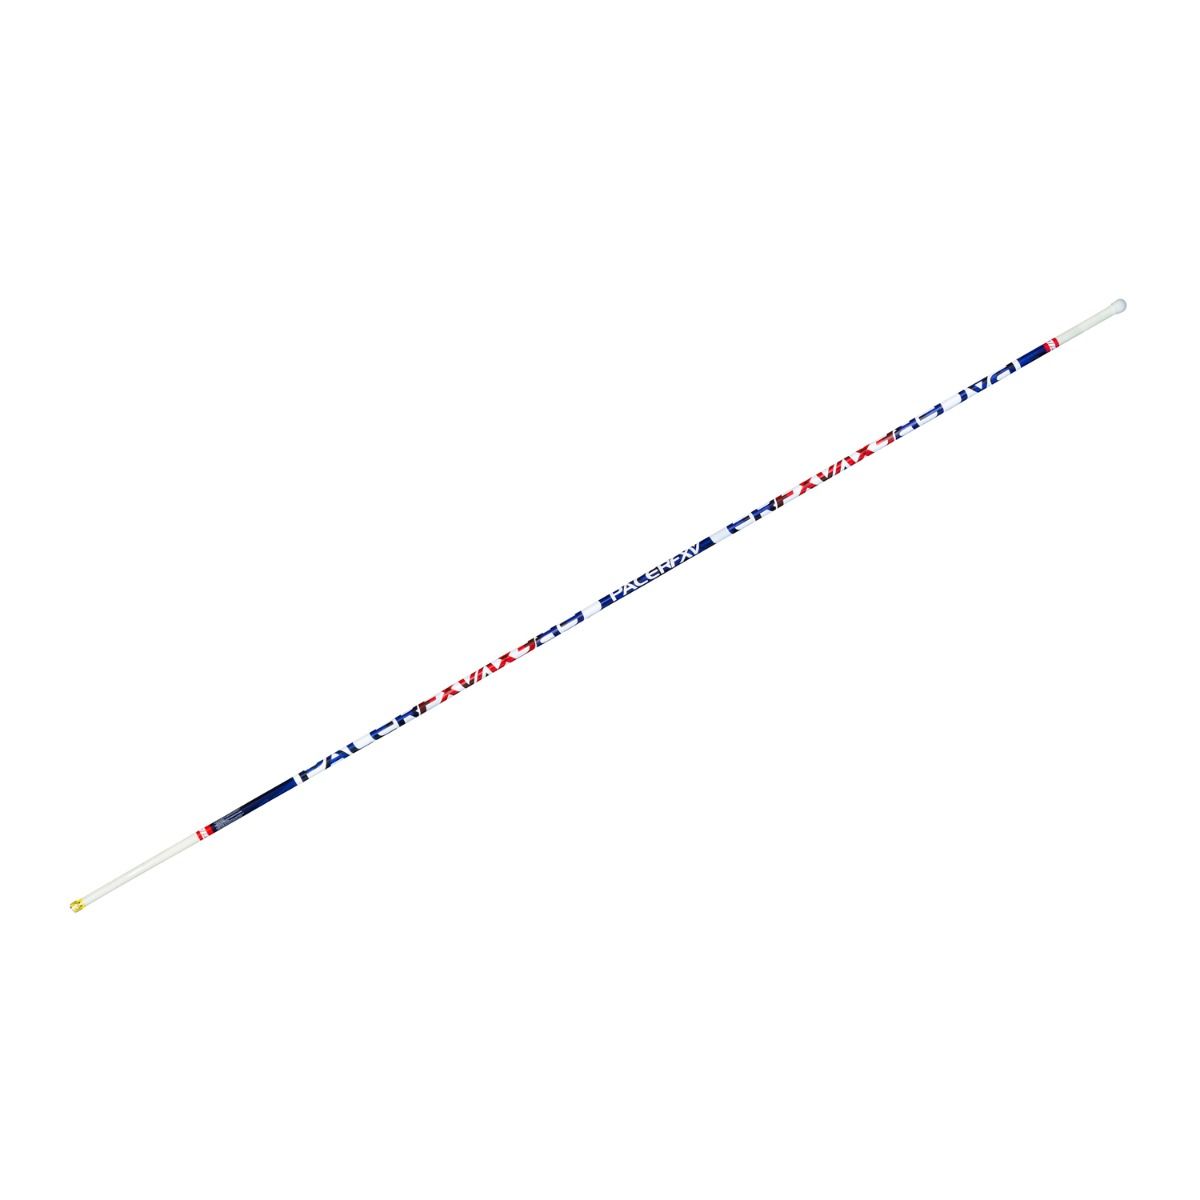 Gill PacerFXV 16' 5" Vaulting Pole